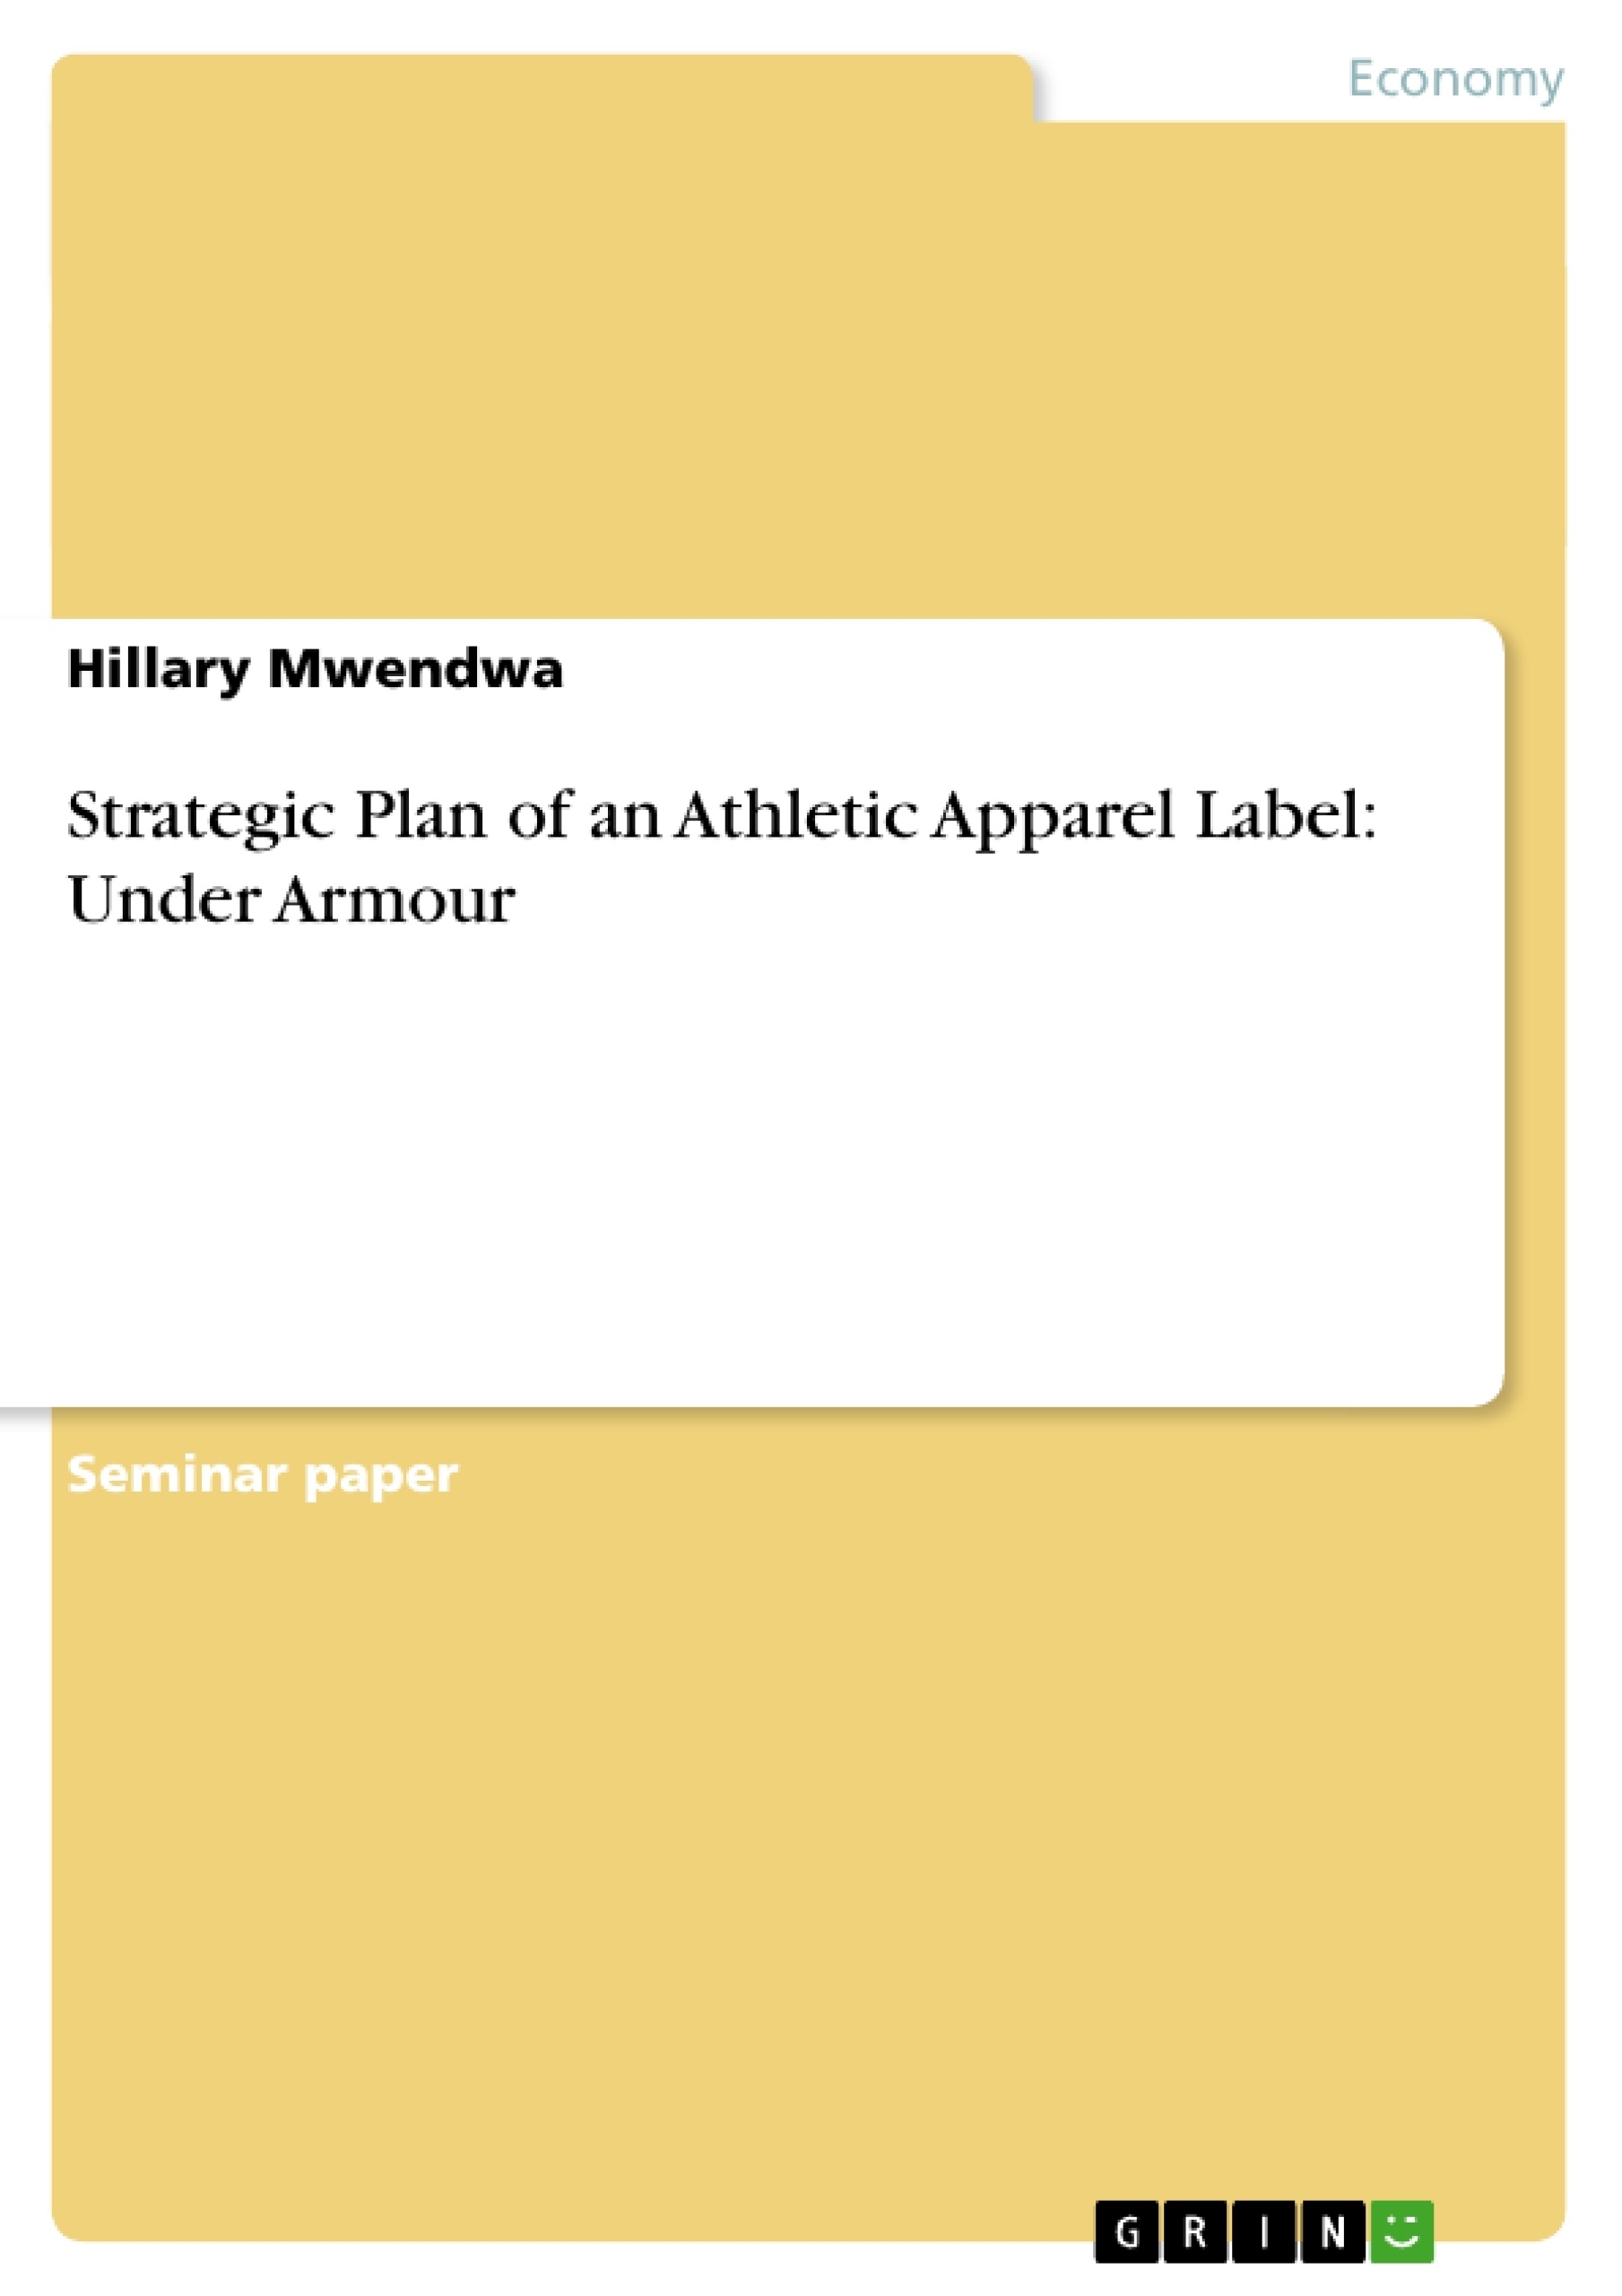 Title: Strategic Plan of an Athletic Apparel Label: Under Armour